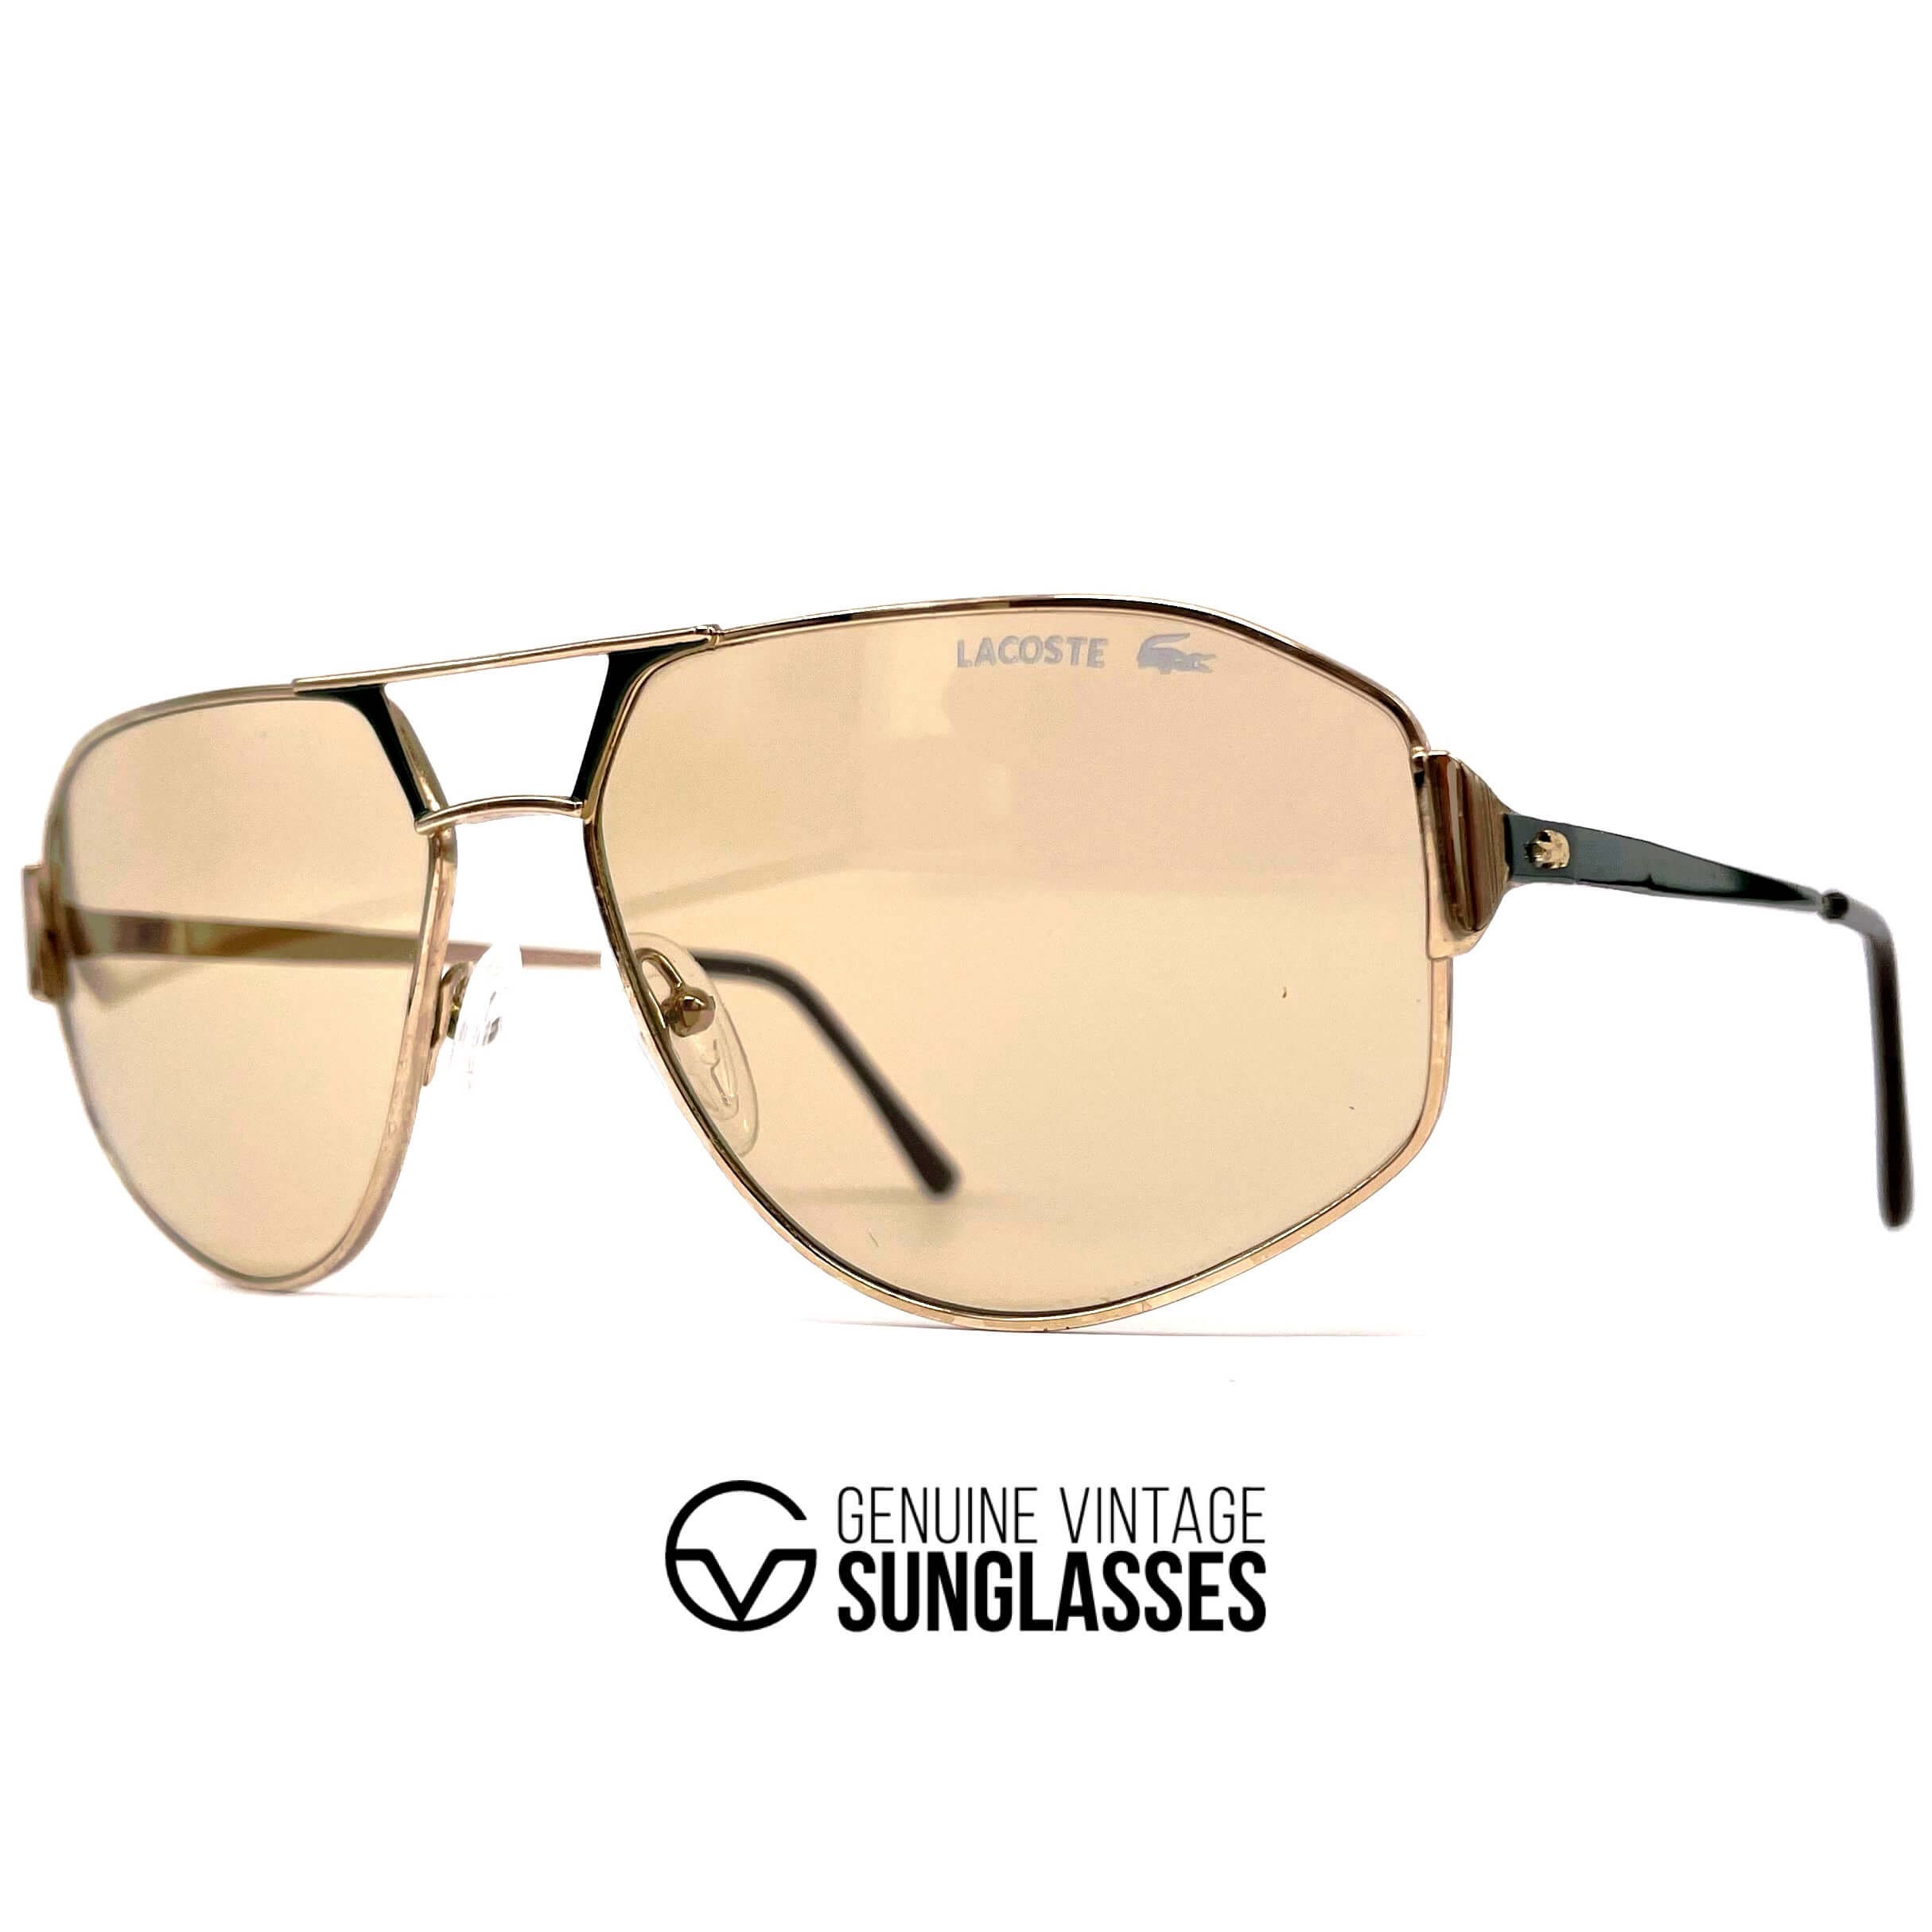 Luxurious Lacoste Sunglasses for Men (SCSO343) - Stayhit